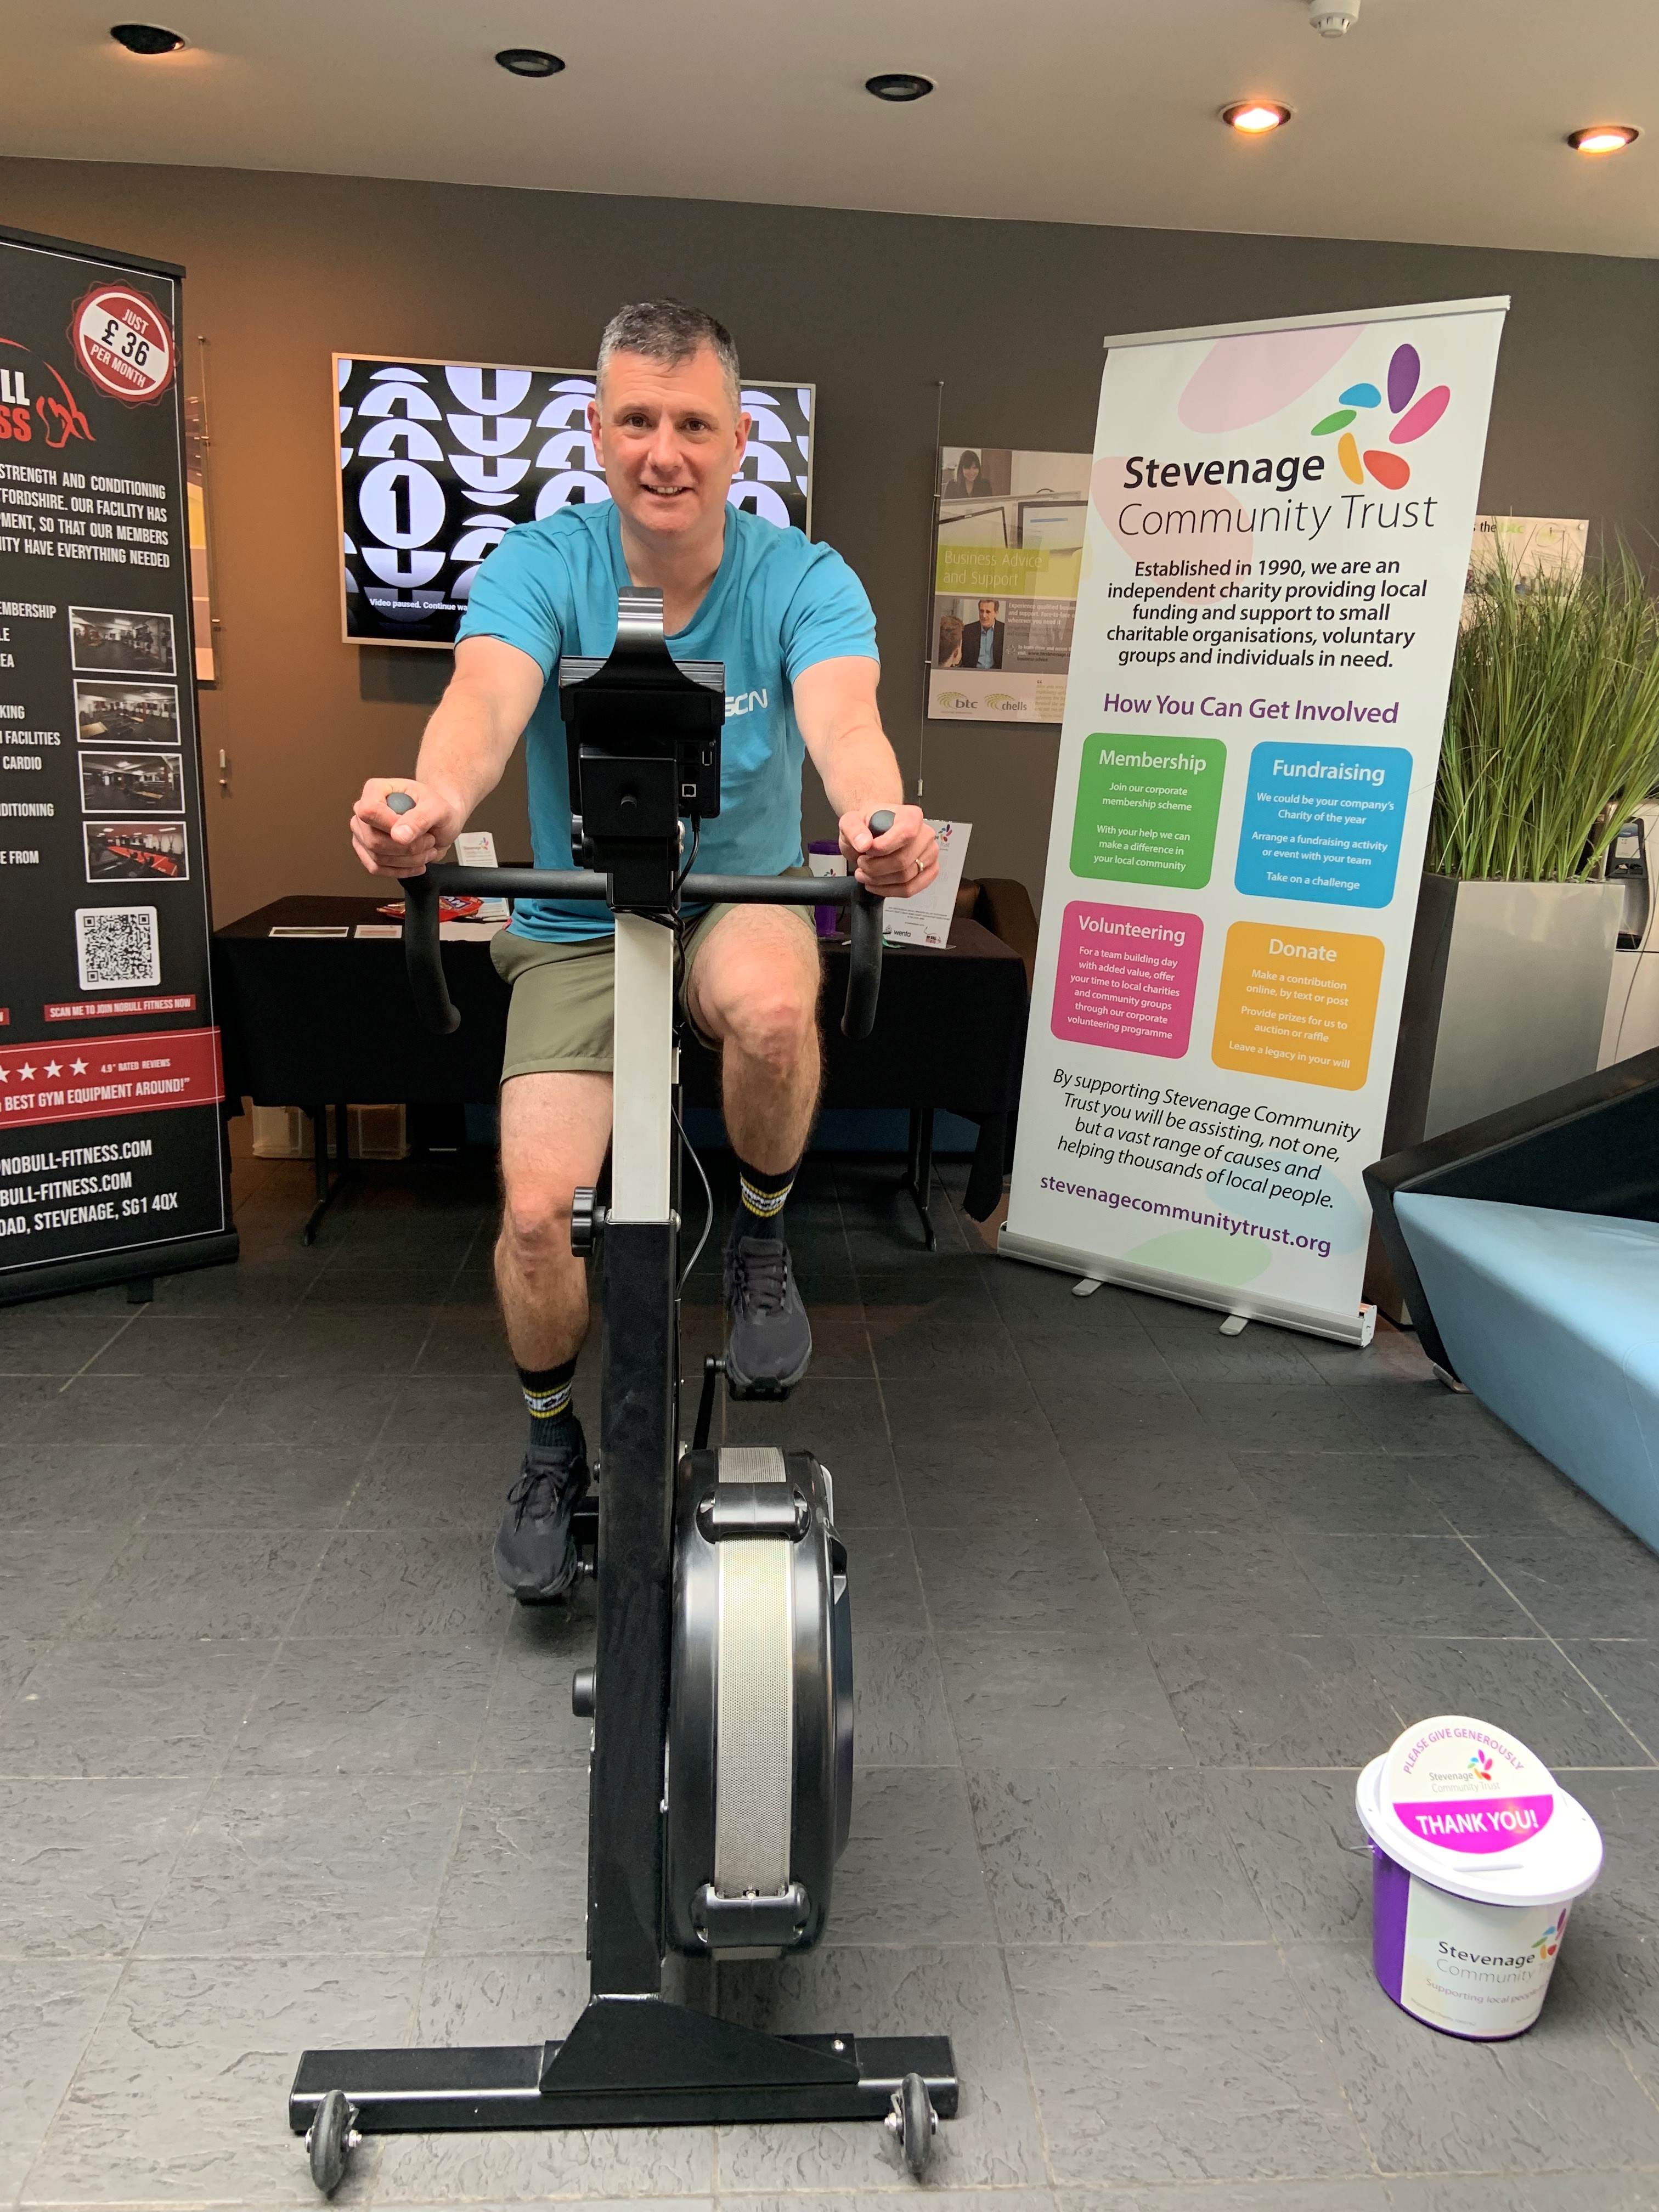 Joe from Sensible Staffing on the bike at the btc charity bike event